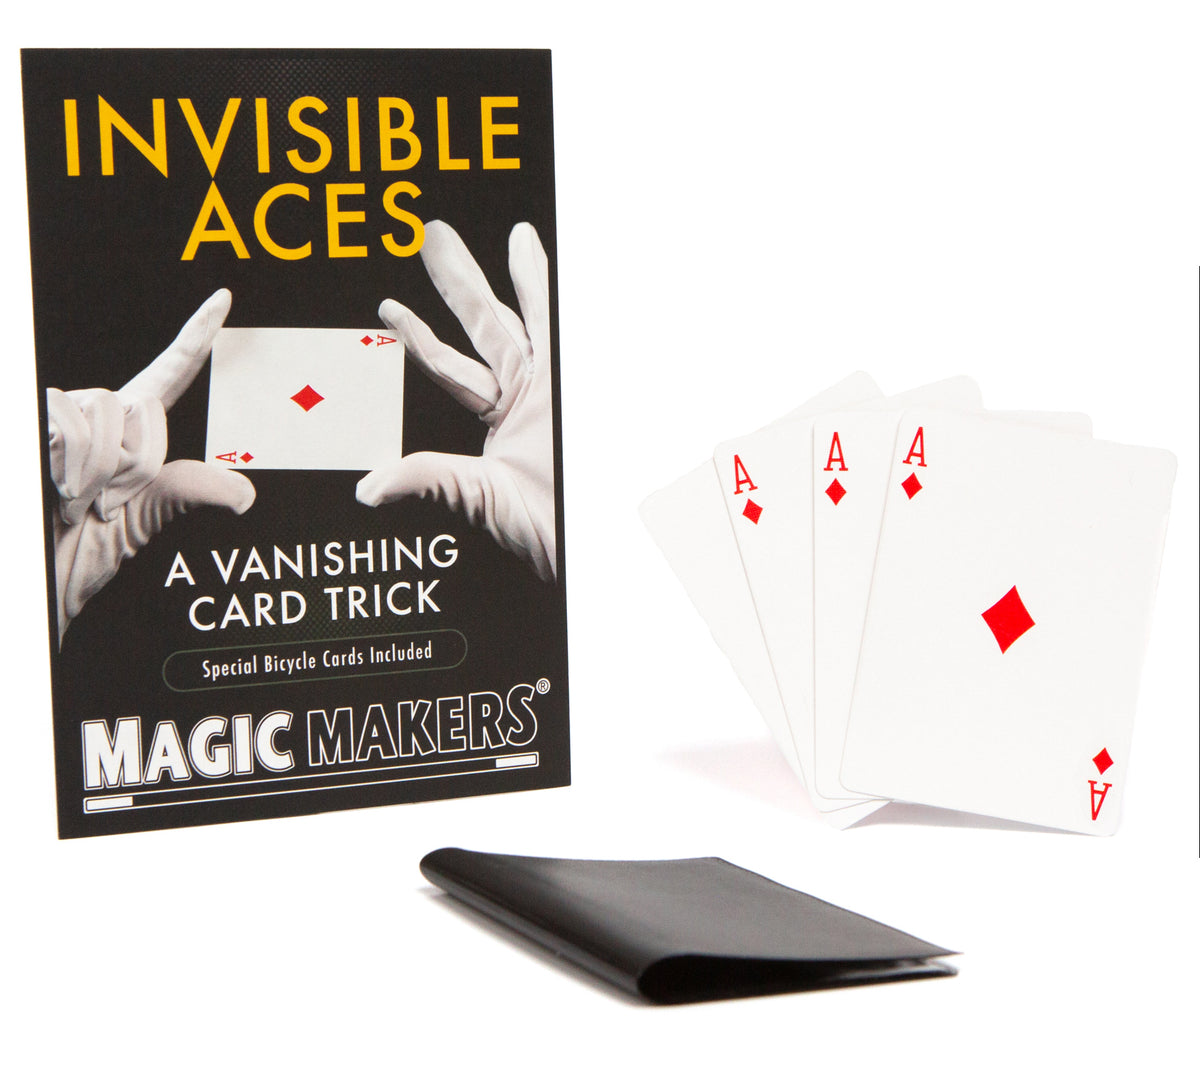 Invisible Aces - Vanishing Card Trick